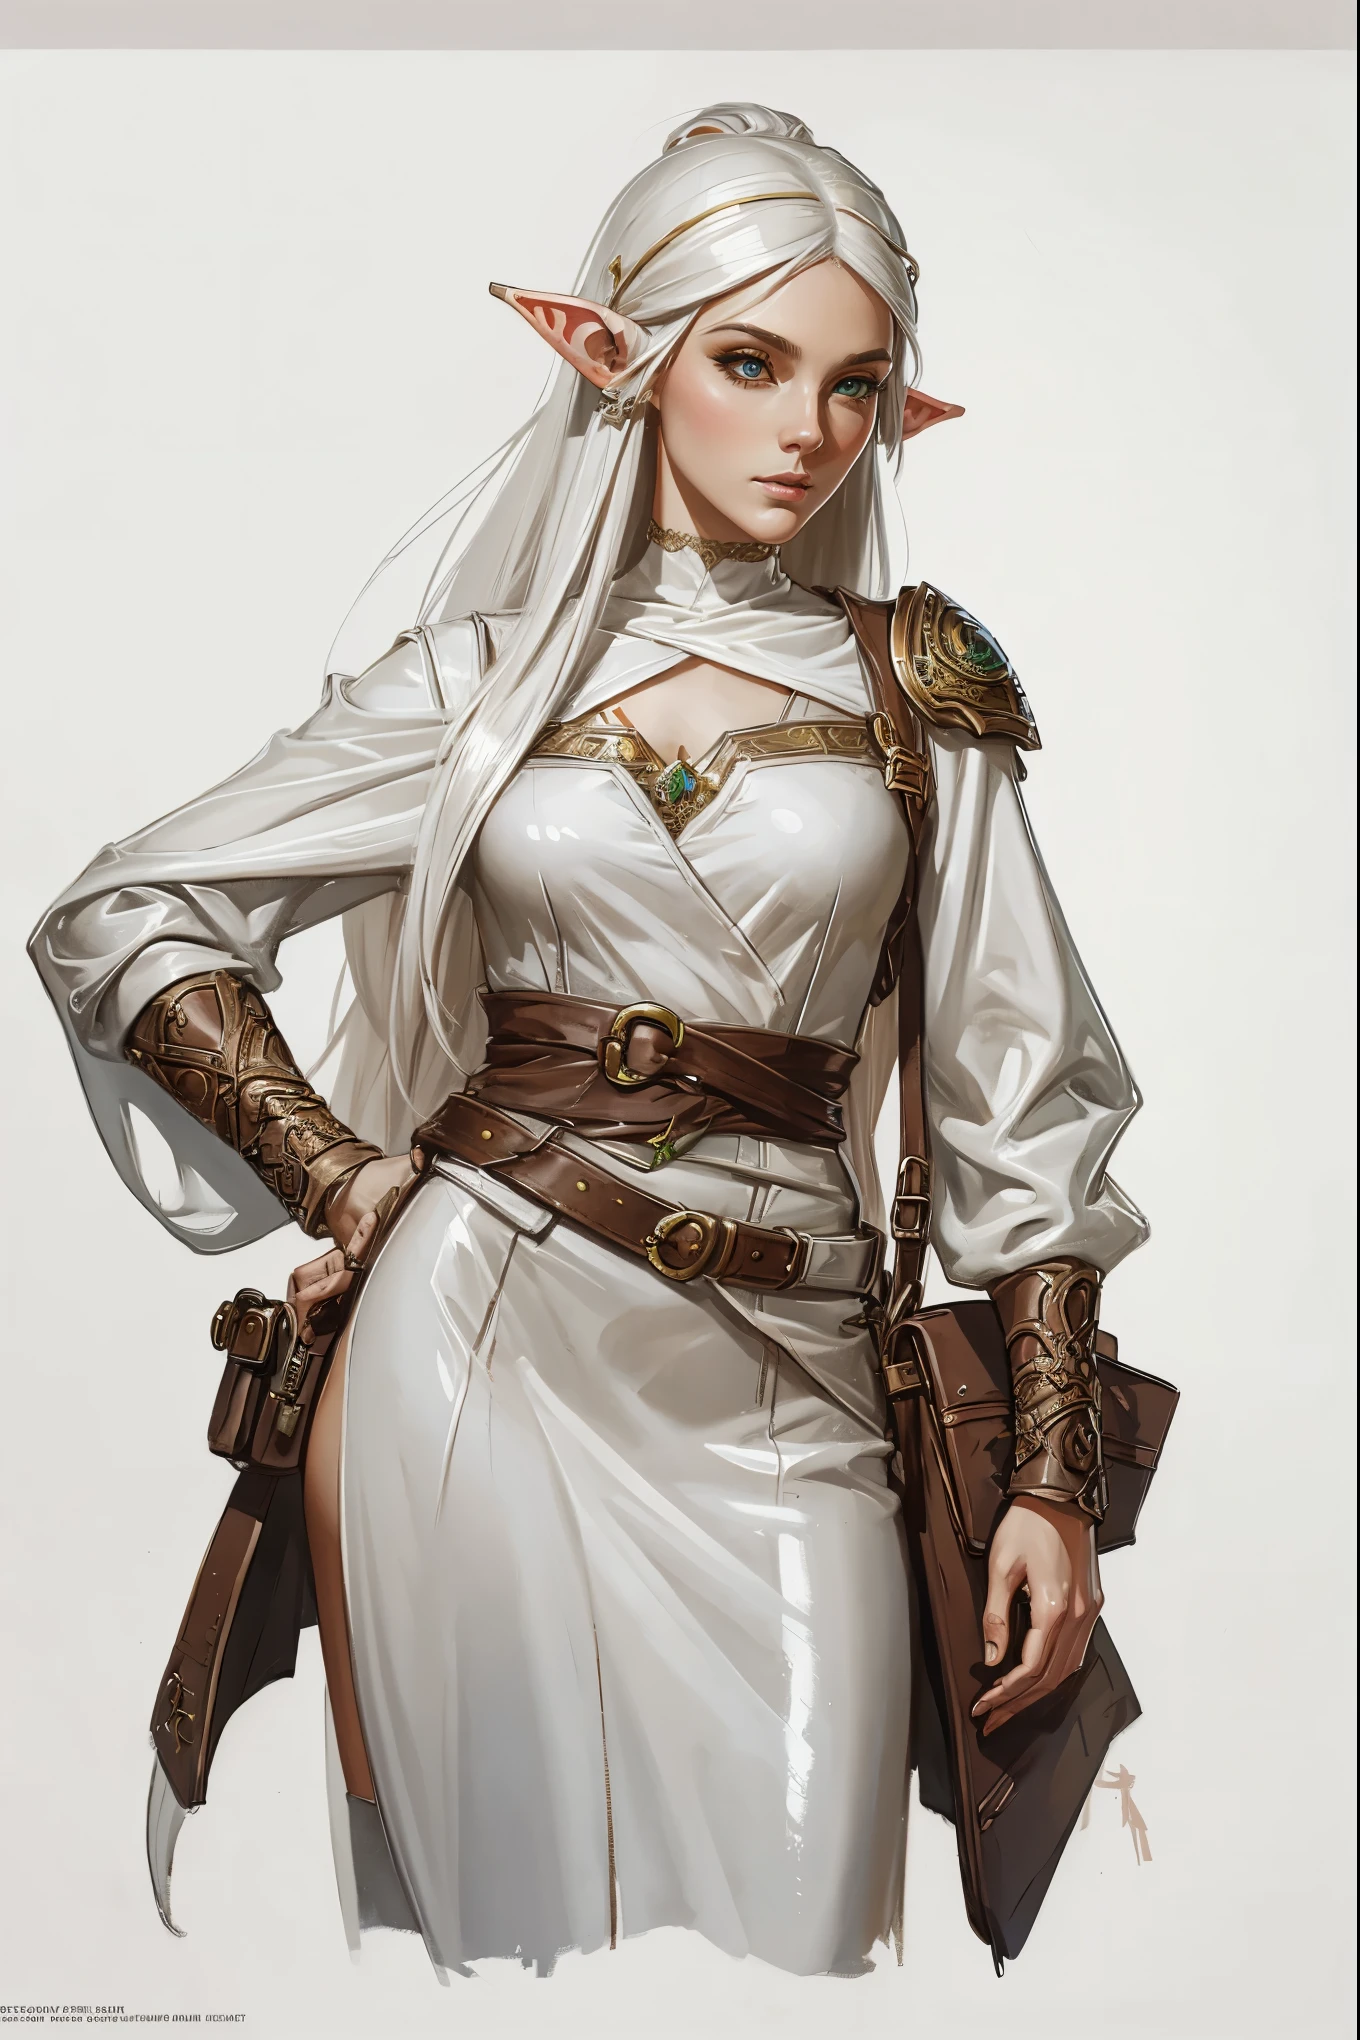 portraiture art of a elf woman, modern hipster clothing, character design, dnd character concept art, loose paint, white background, painterly illustration, highly detailed, cartoonish proportions, glossy straight hair, creative